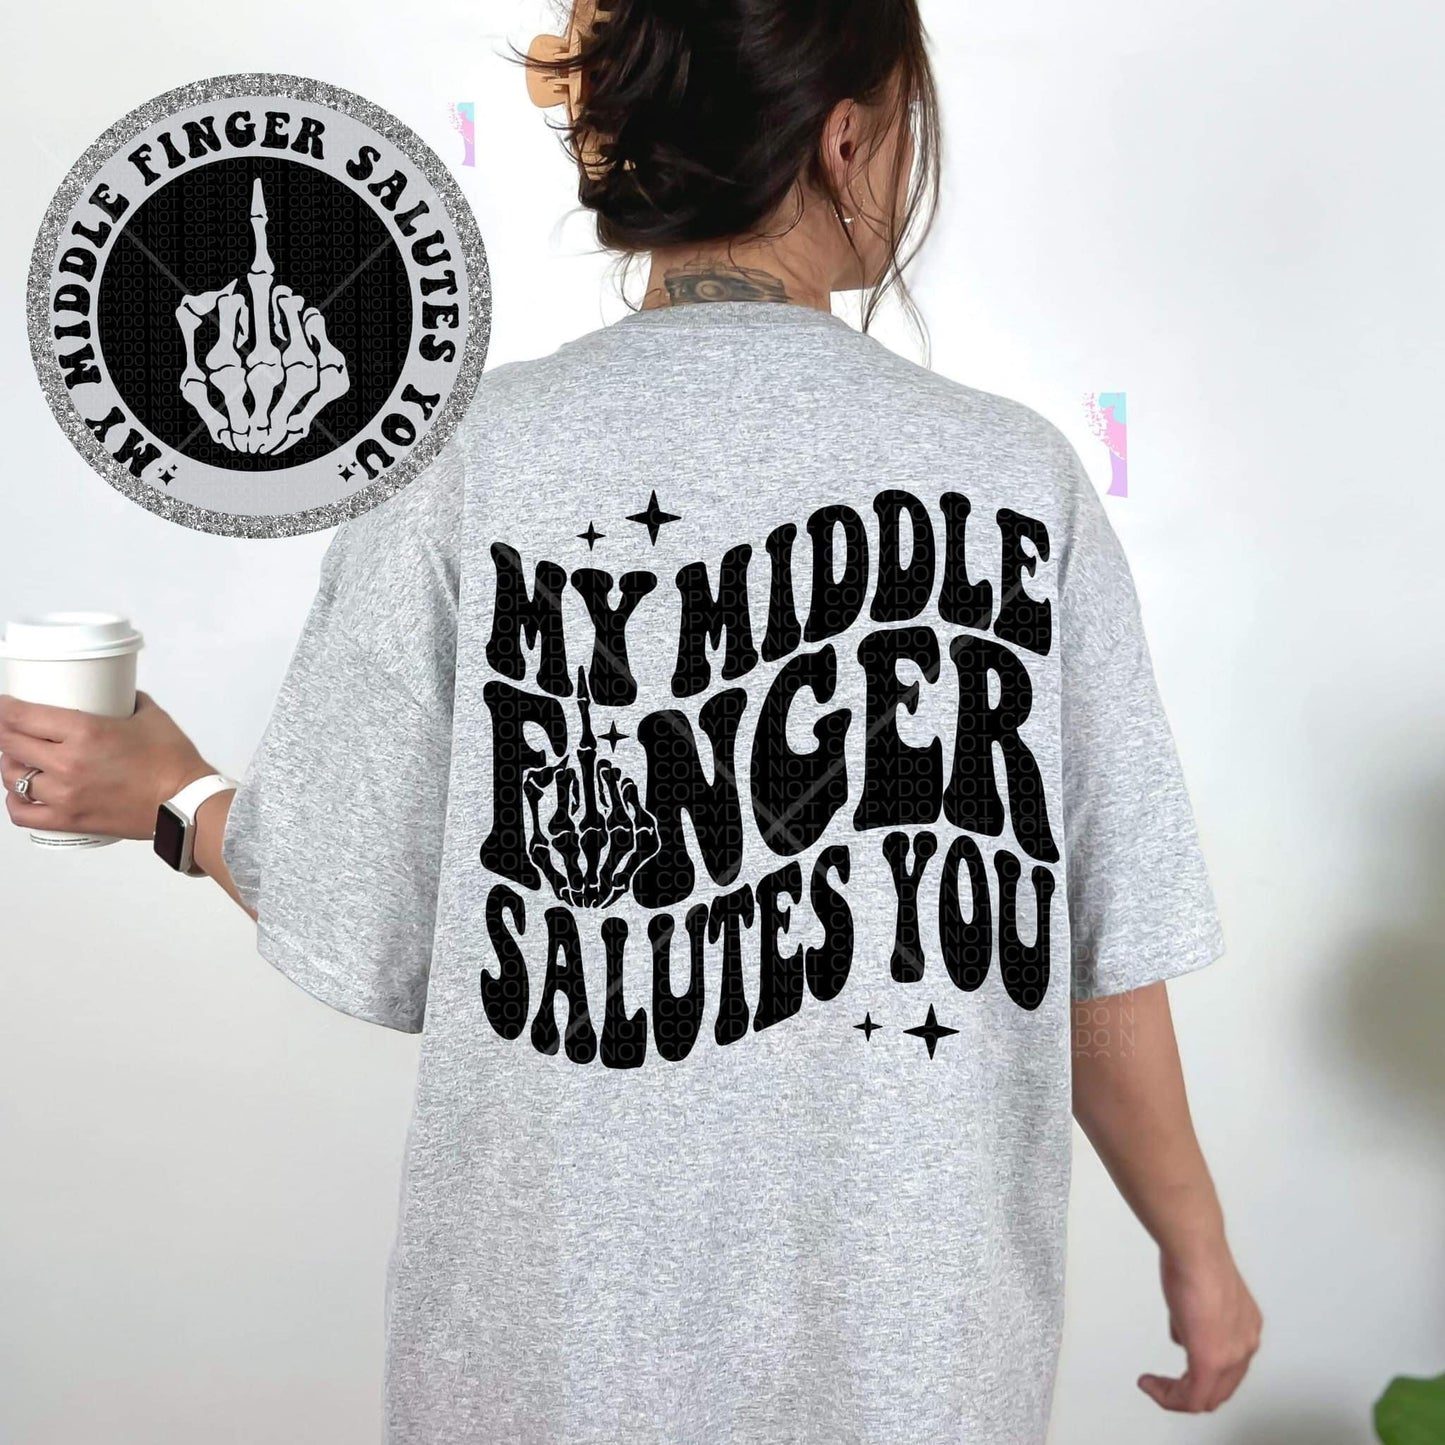 My middle finger salutes you- Front & Back *Ollie & Co. Exclusive*